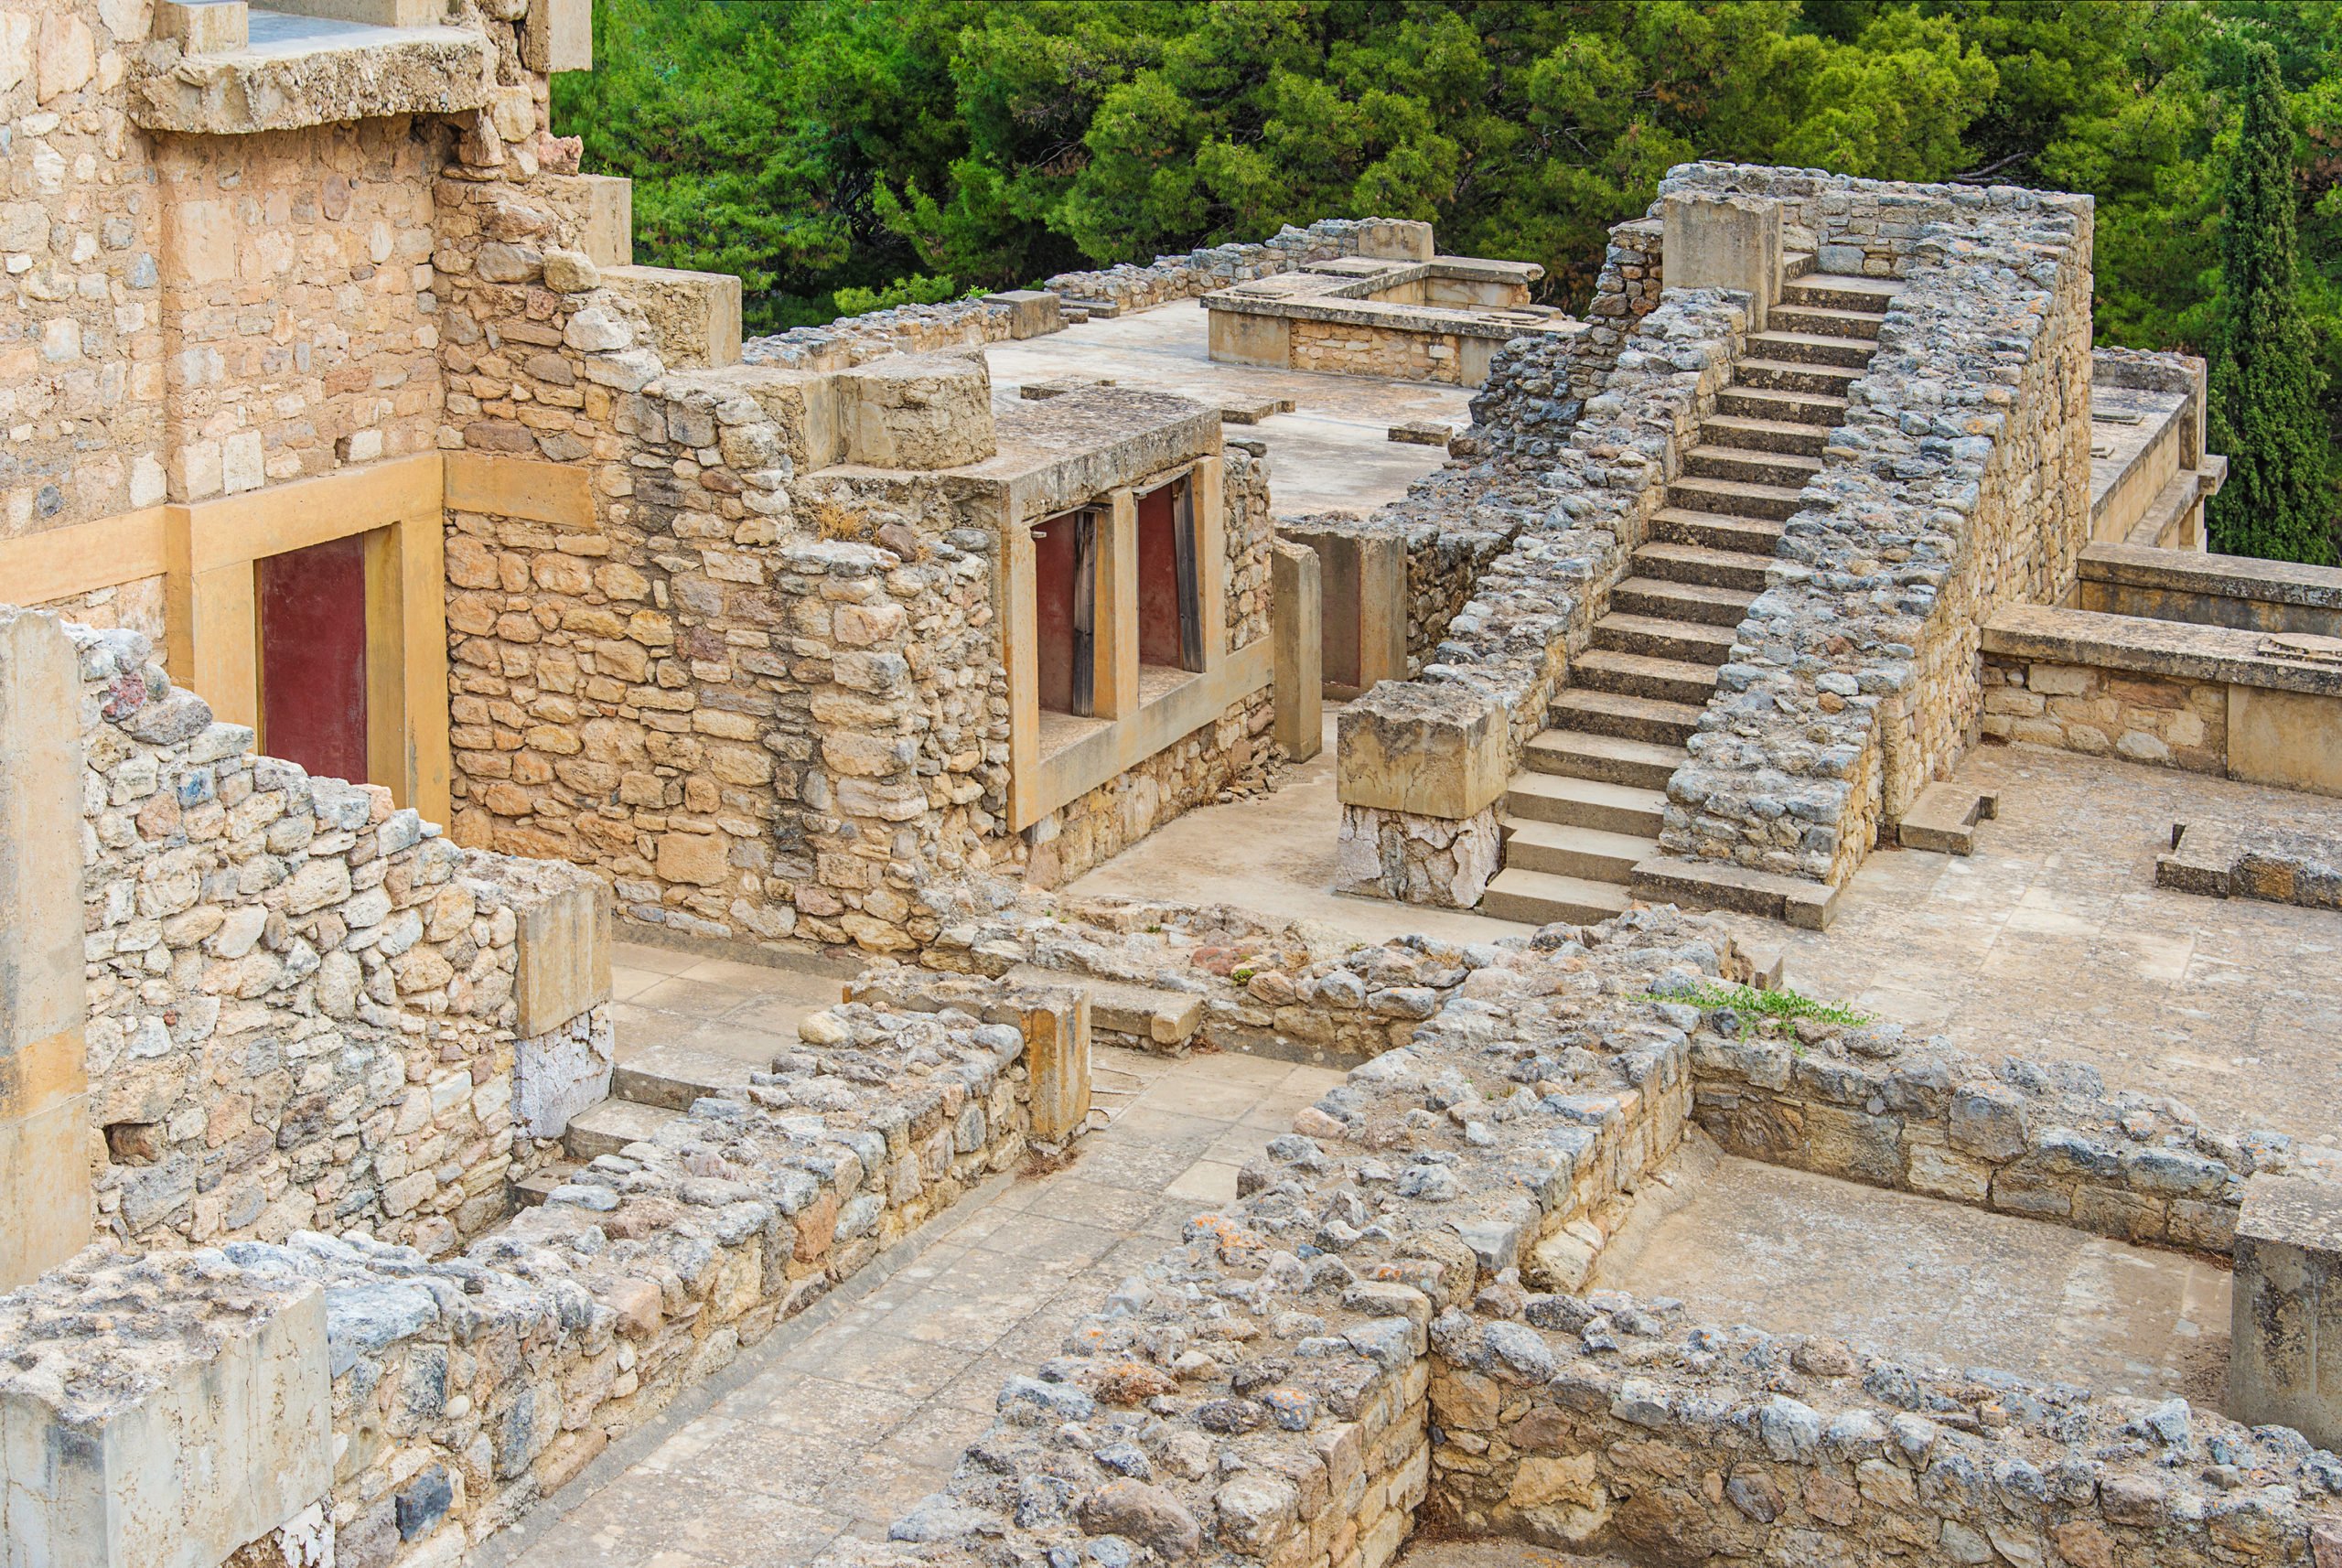 Enjoy A Visit Of The Ancient Ruins Of Knossos And The Archaelogical Museum Of Heraklion On The Knossos Palace And Heraklion Archaeological Museum Tour